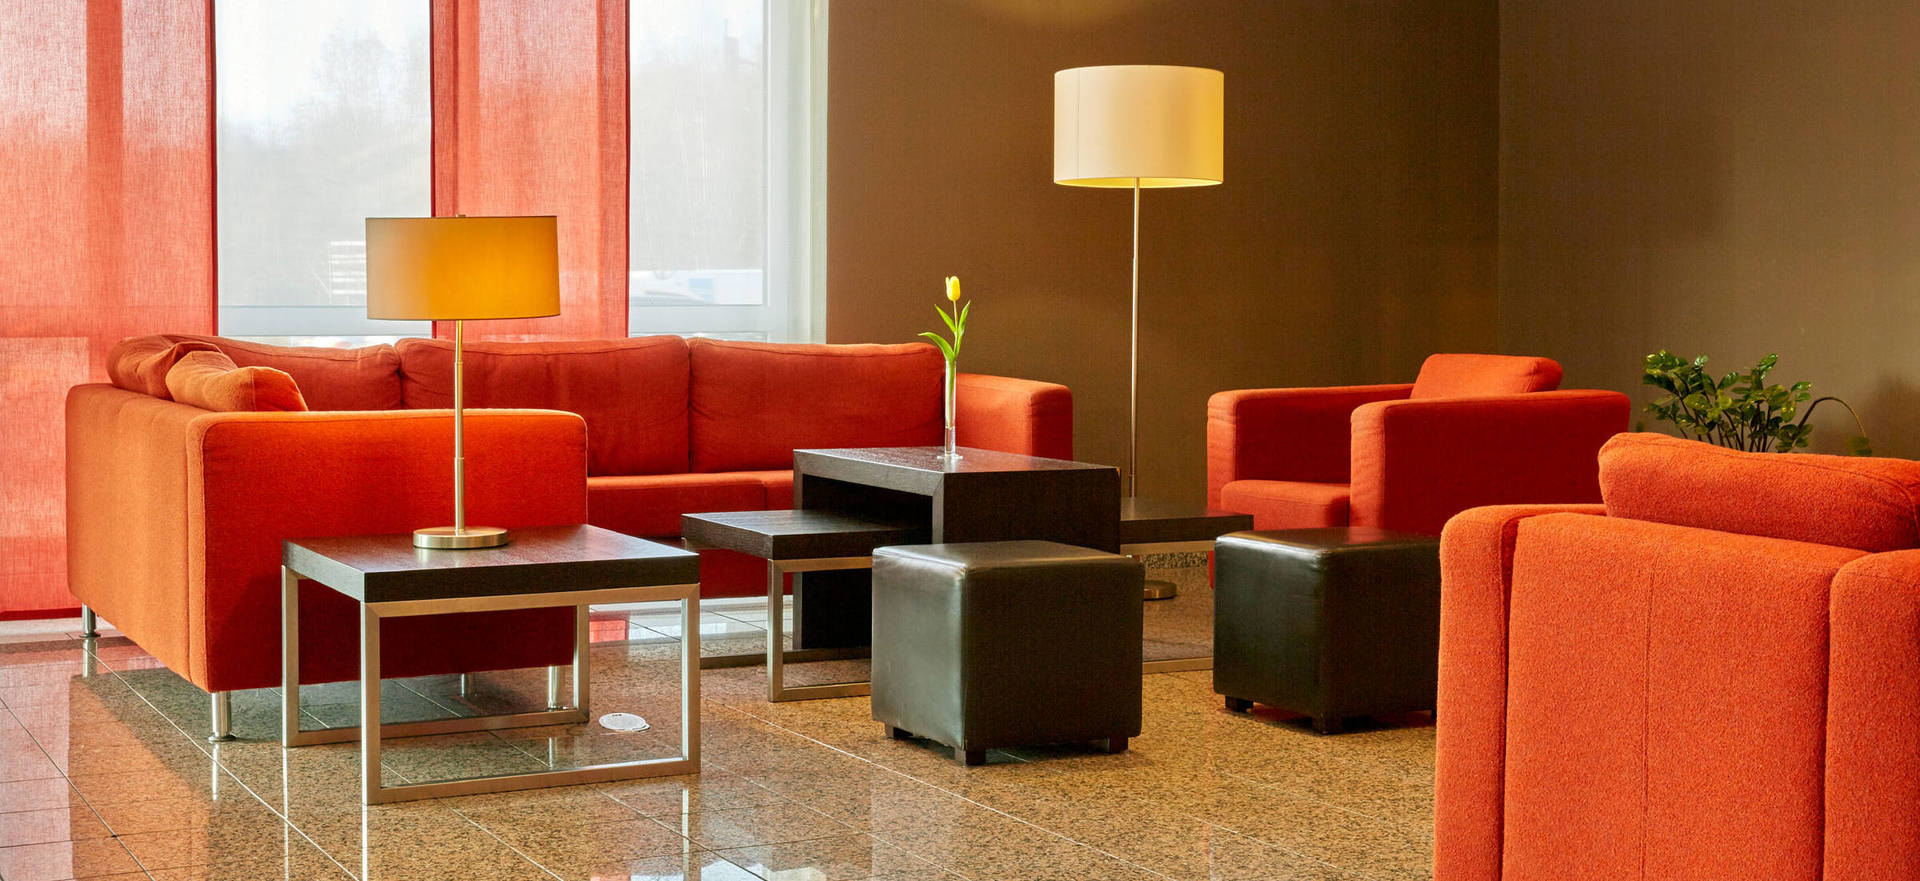 Lobby of the H+ Hotel Leipzig-Halle - Official website